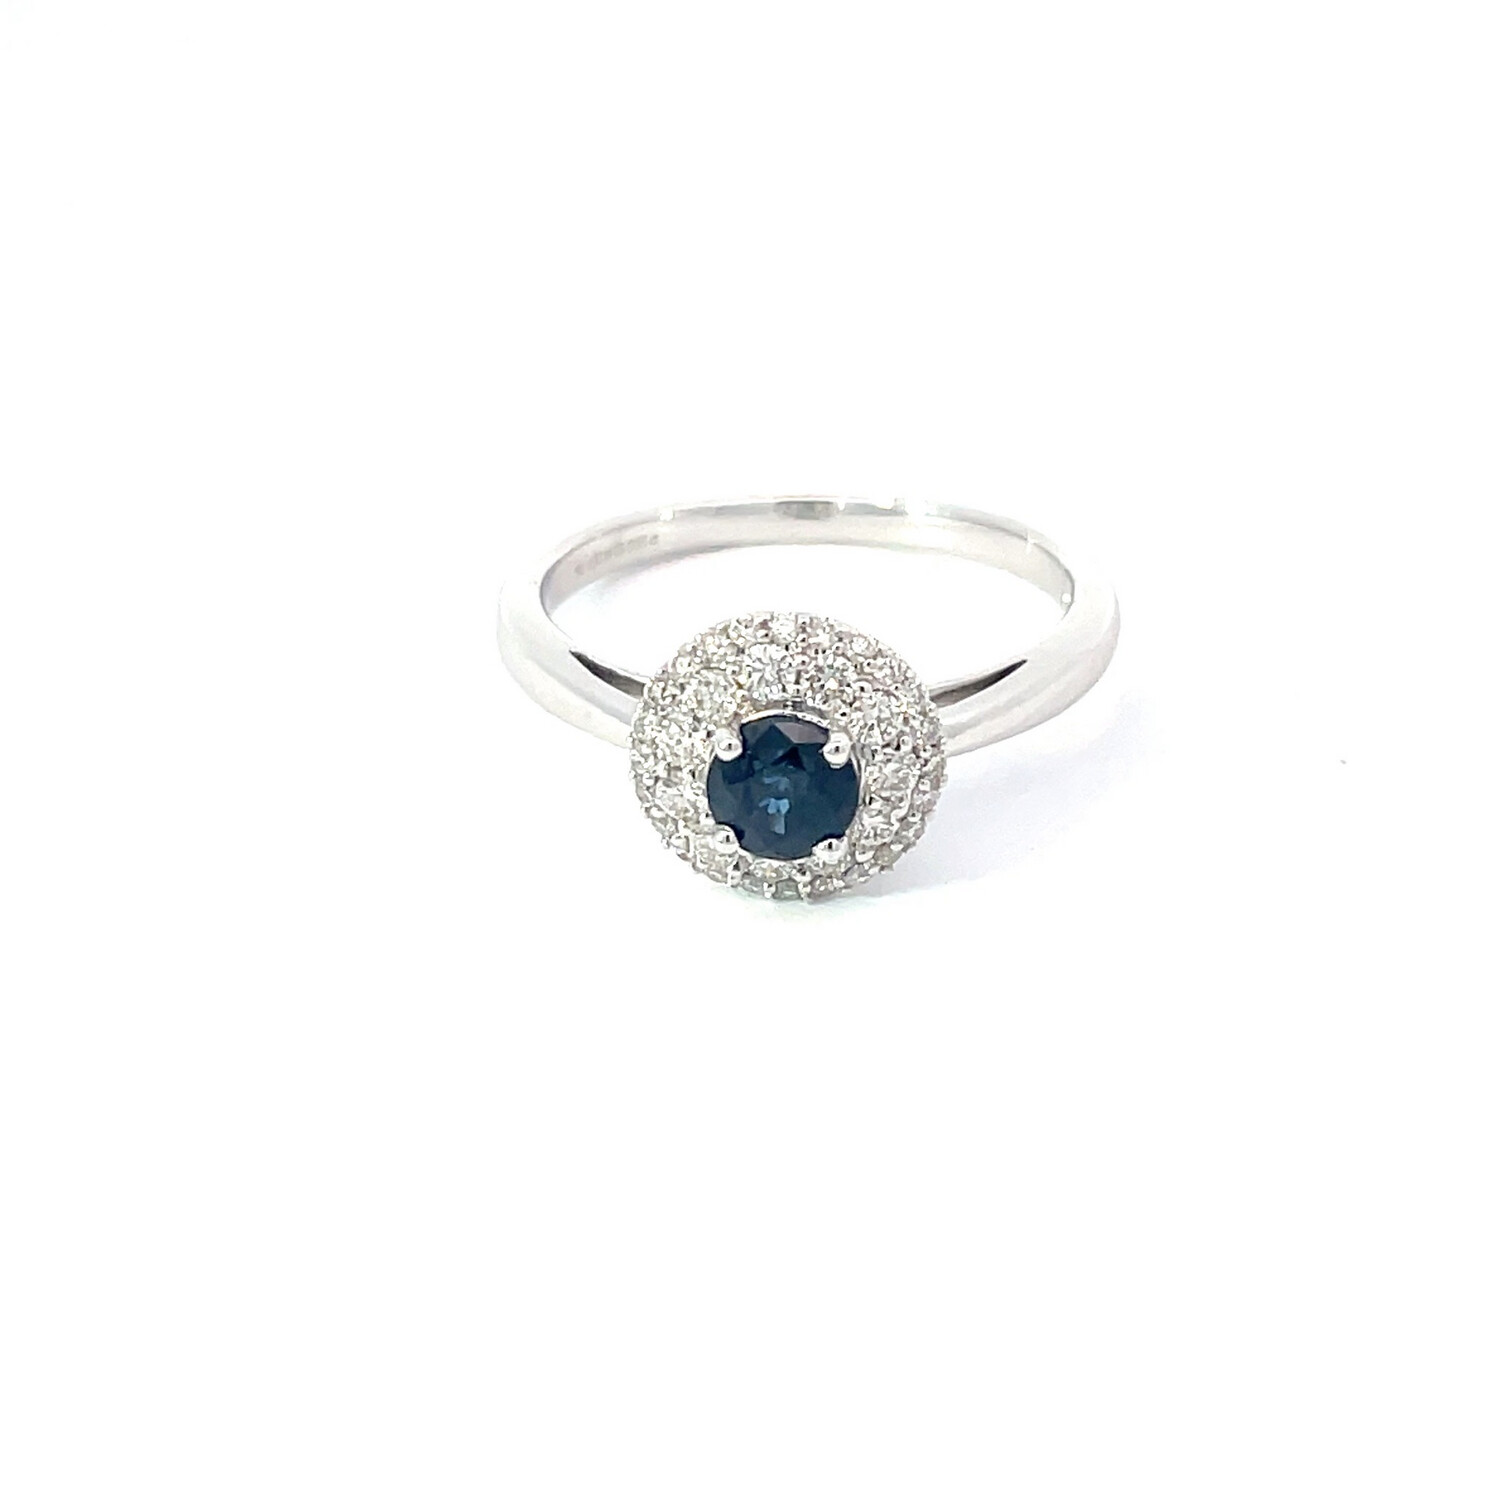 Sapphire and Diamond Ring, Size M